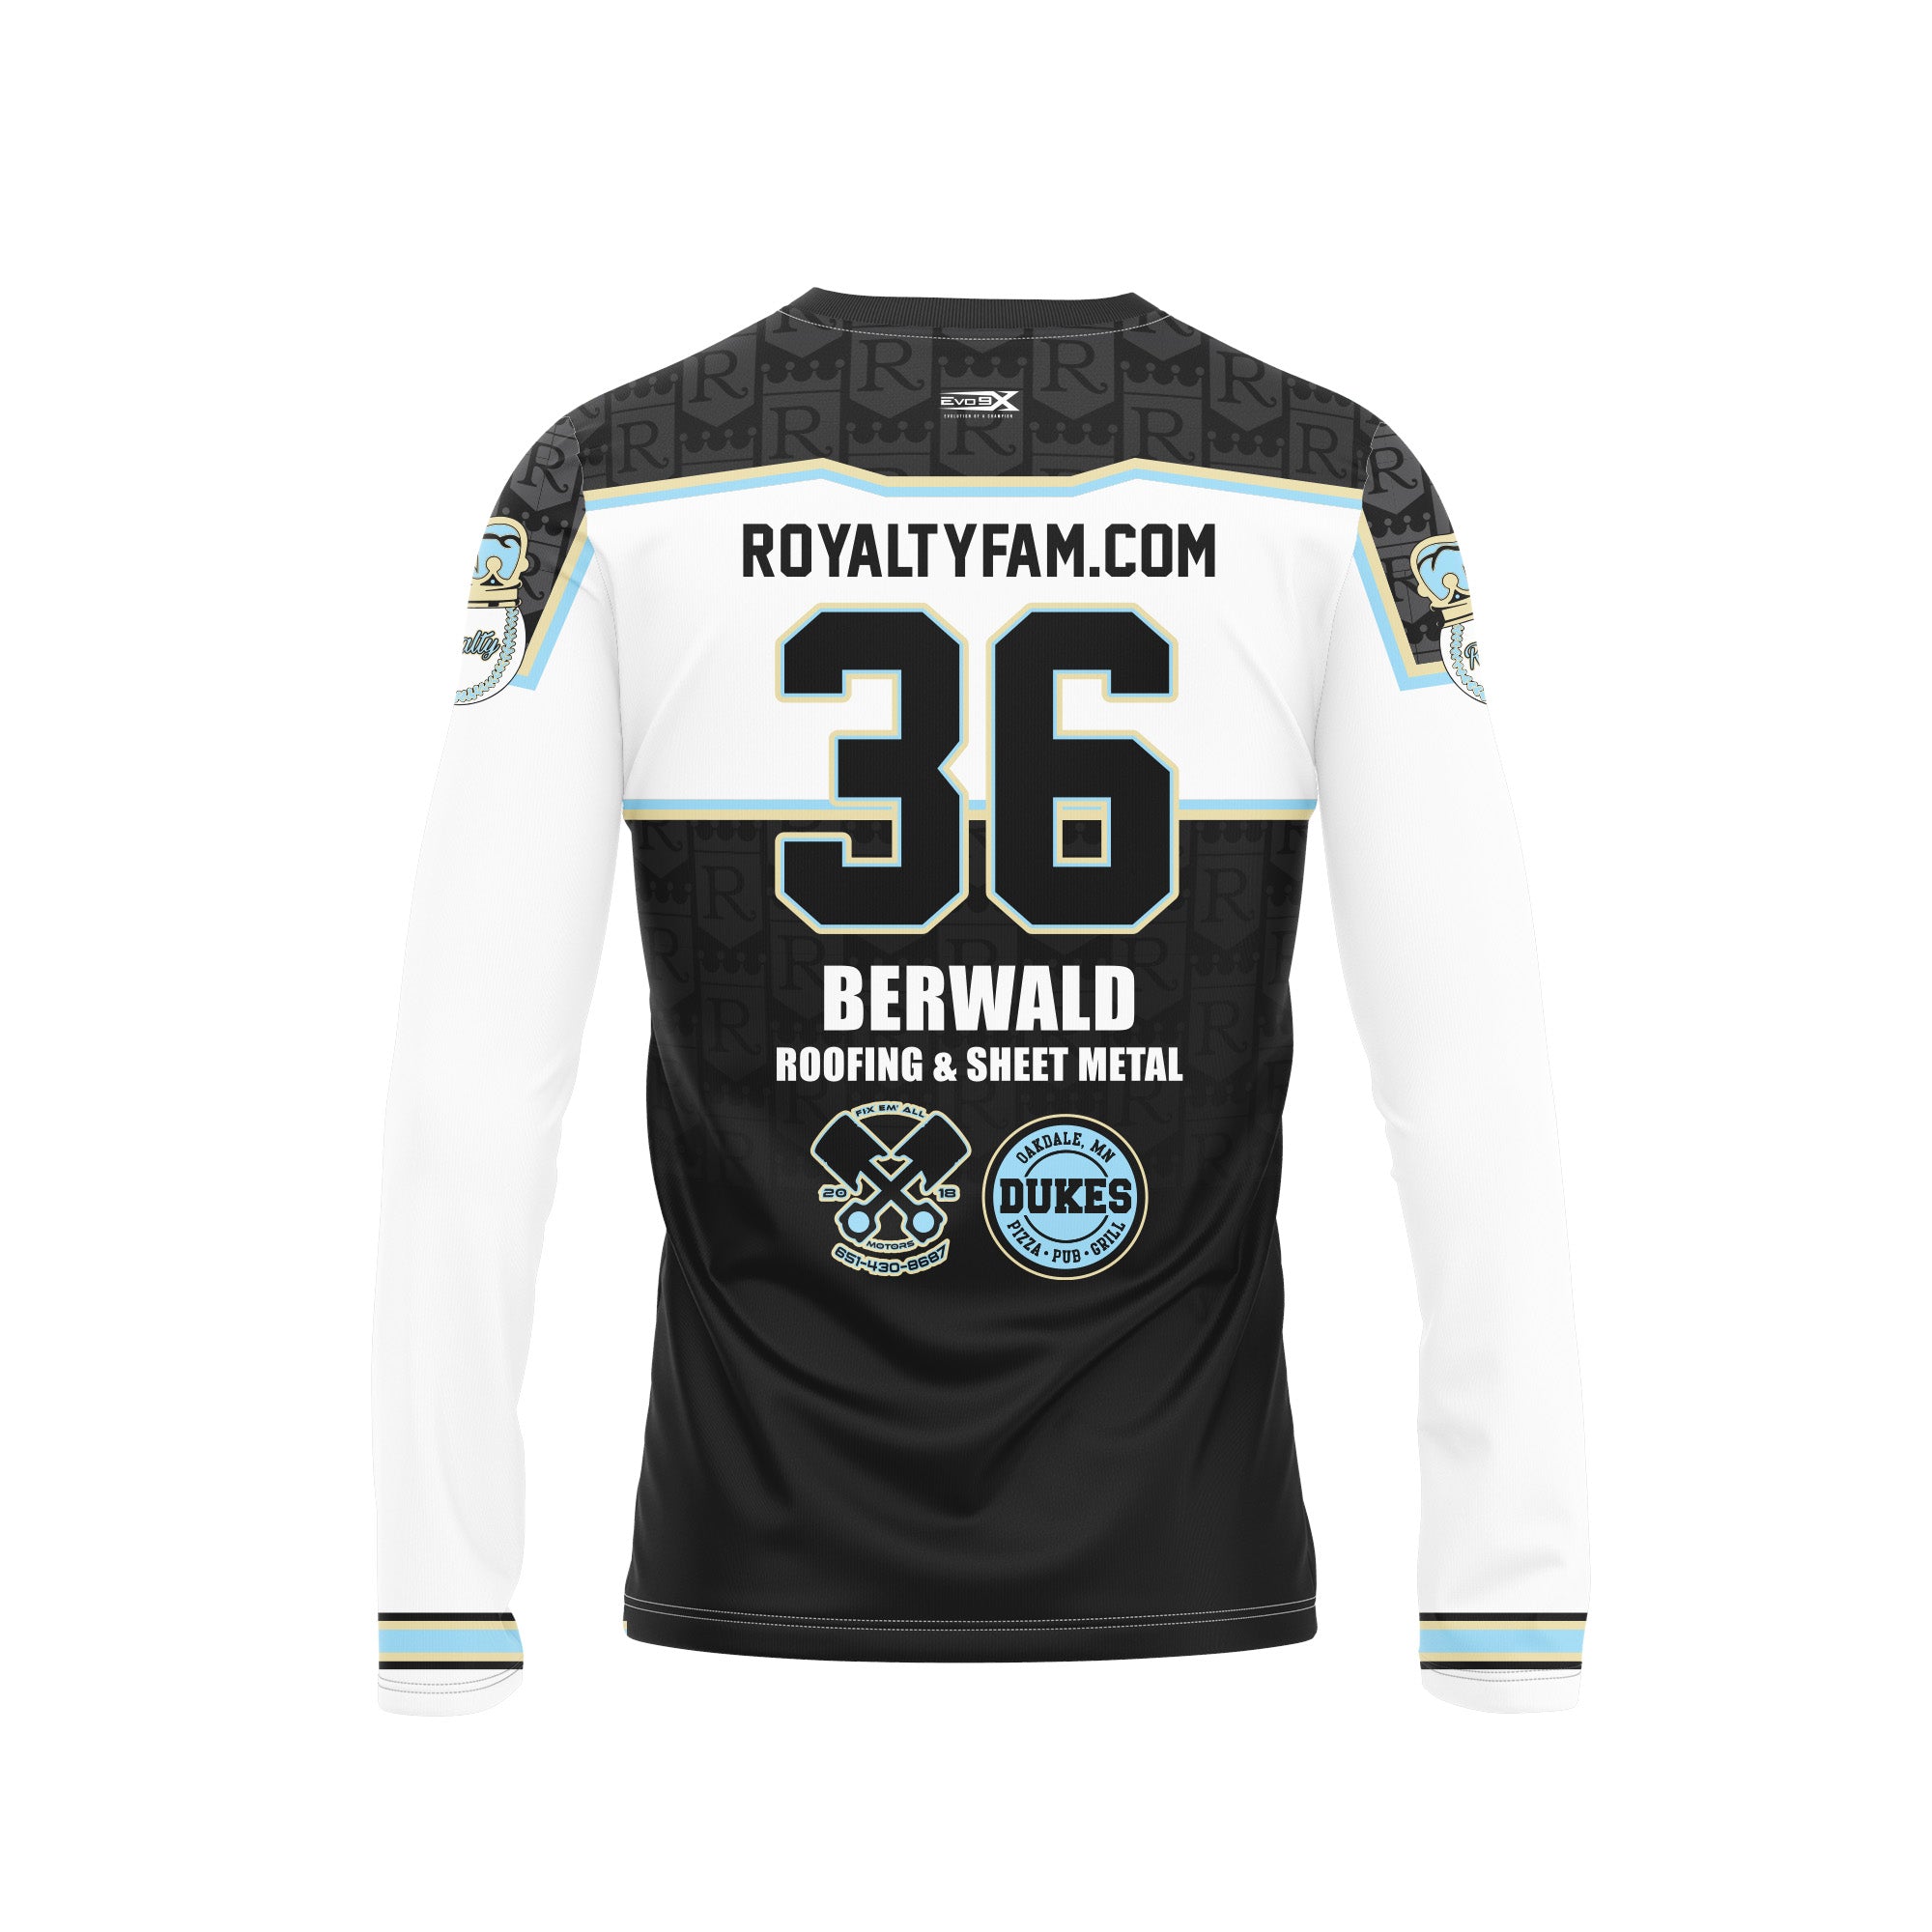 Royalty Fam-Ryans Sublimated Long Sleeve Jersey